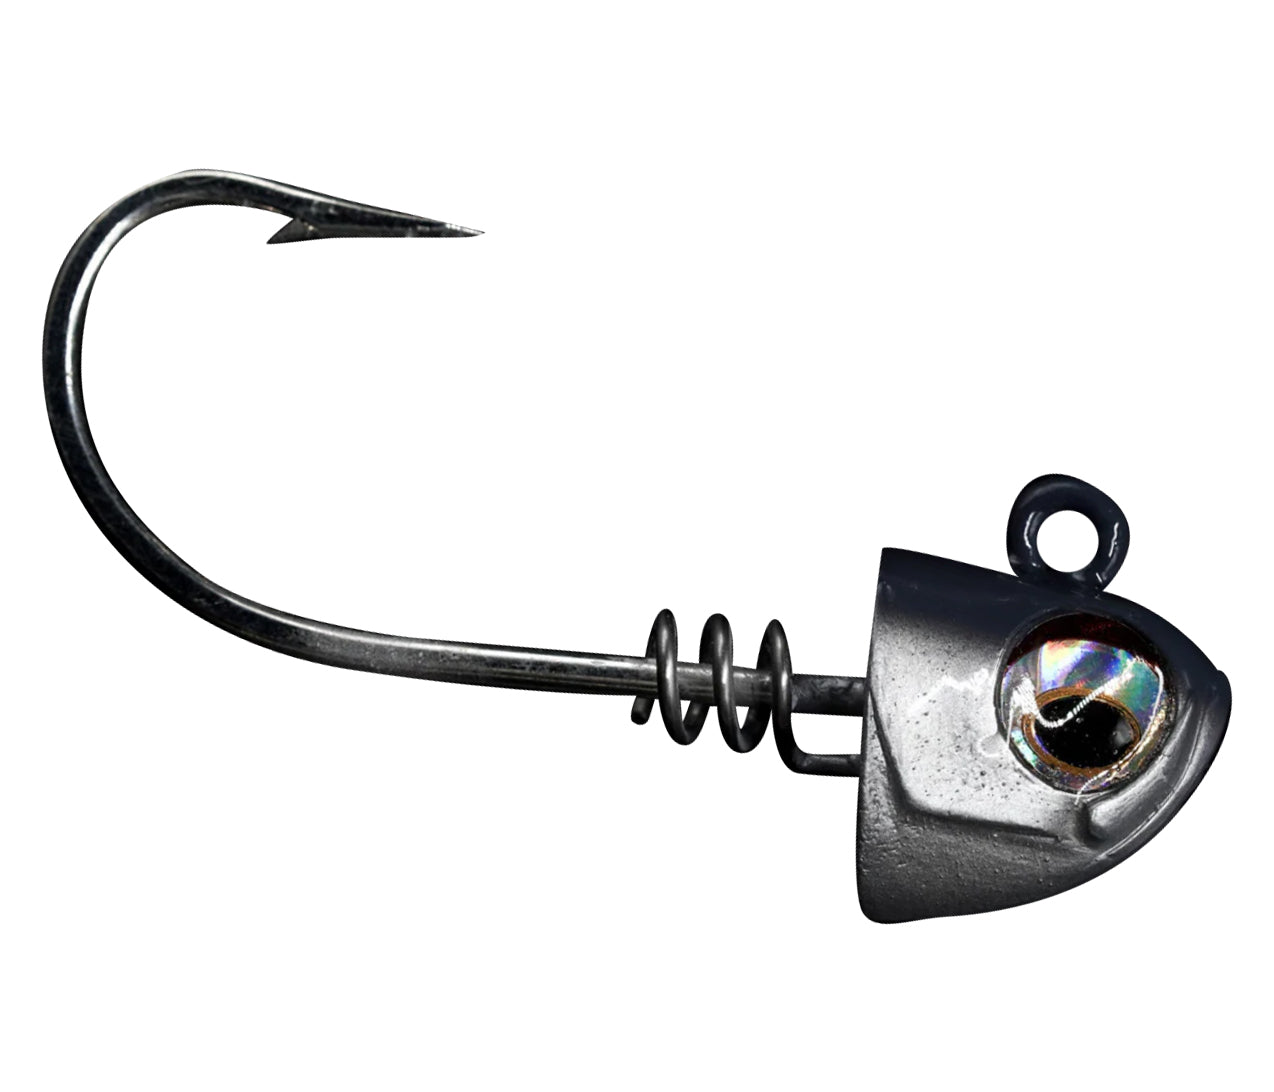 No Live Bait Needed 3 Jig Heads, 48% OFF